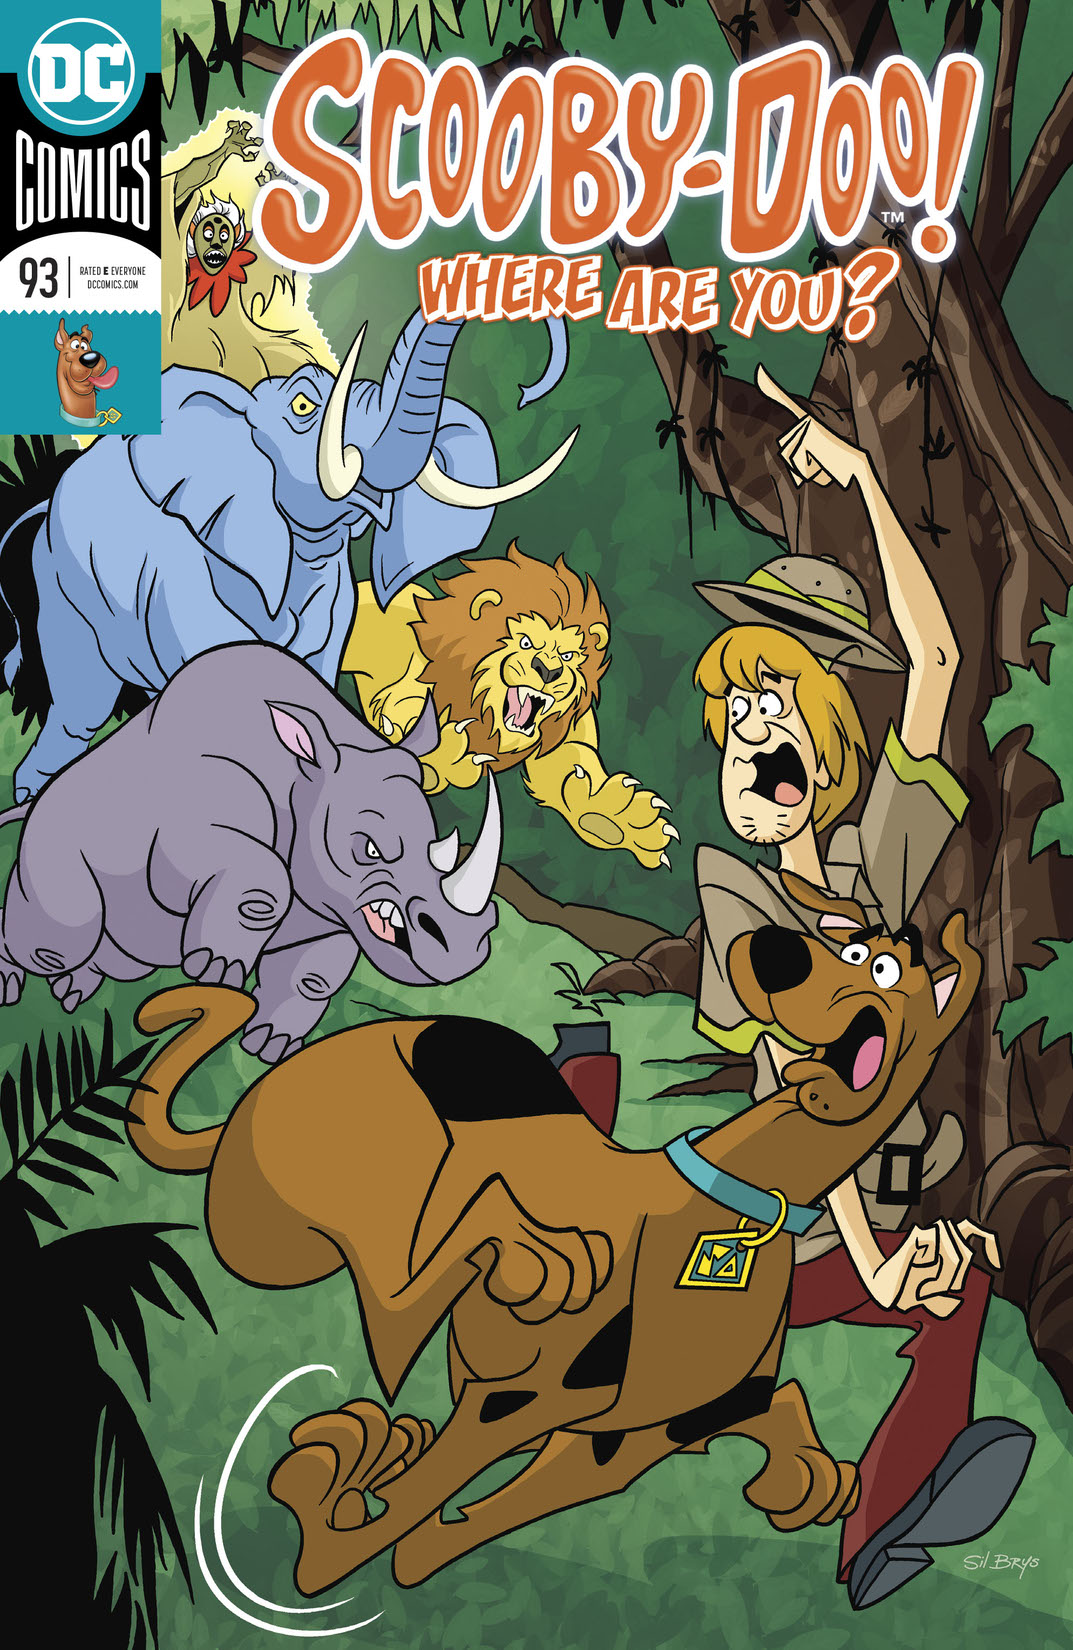 Scooby-Doo, Where Are You? #93 preview images